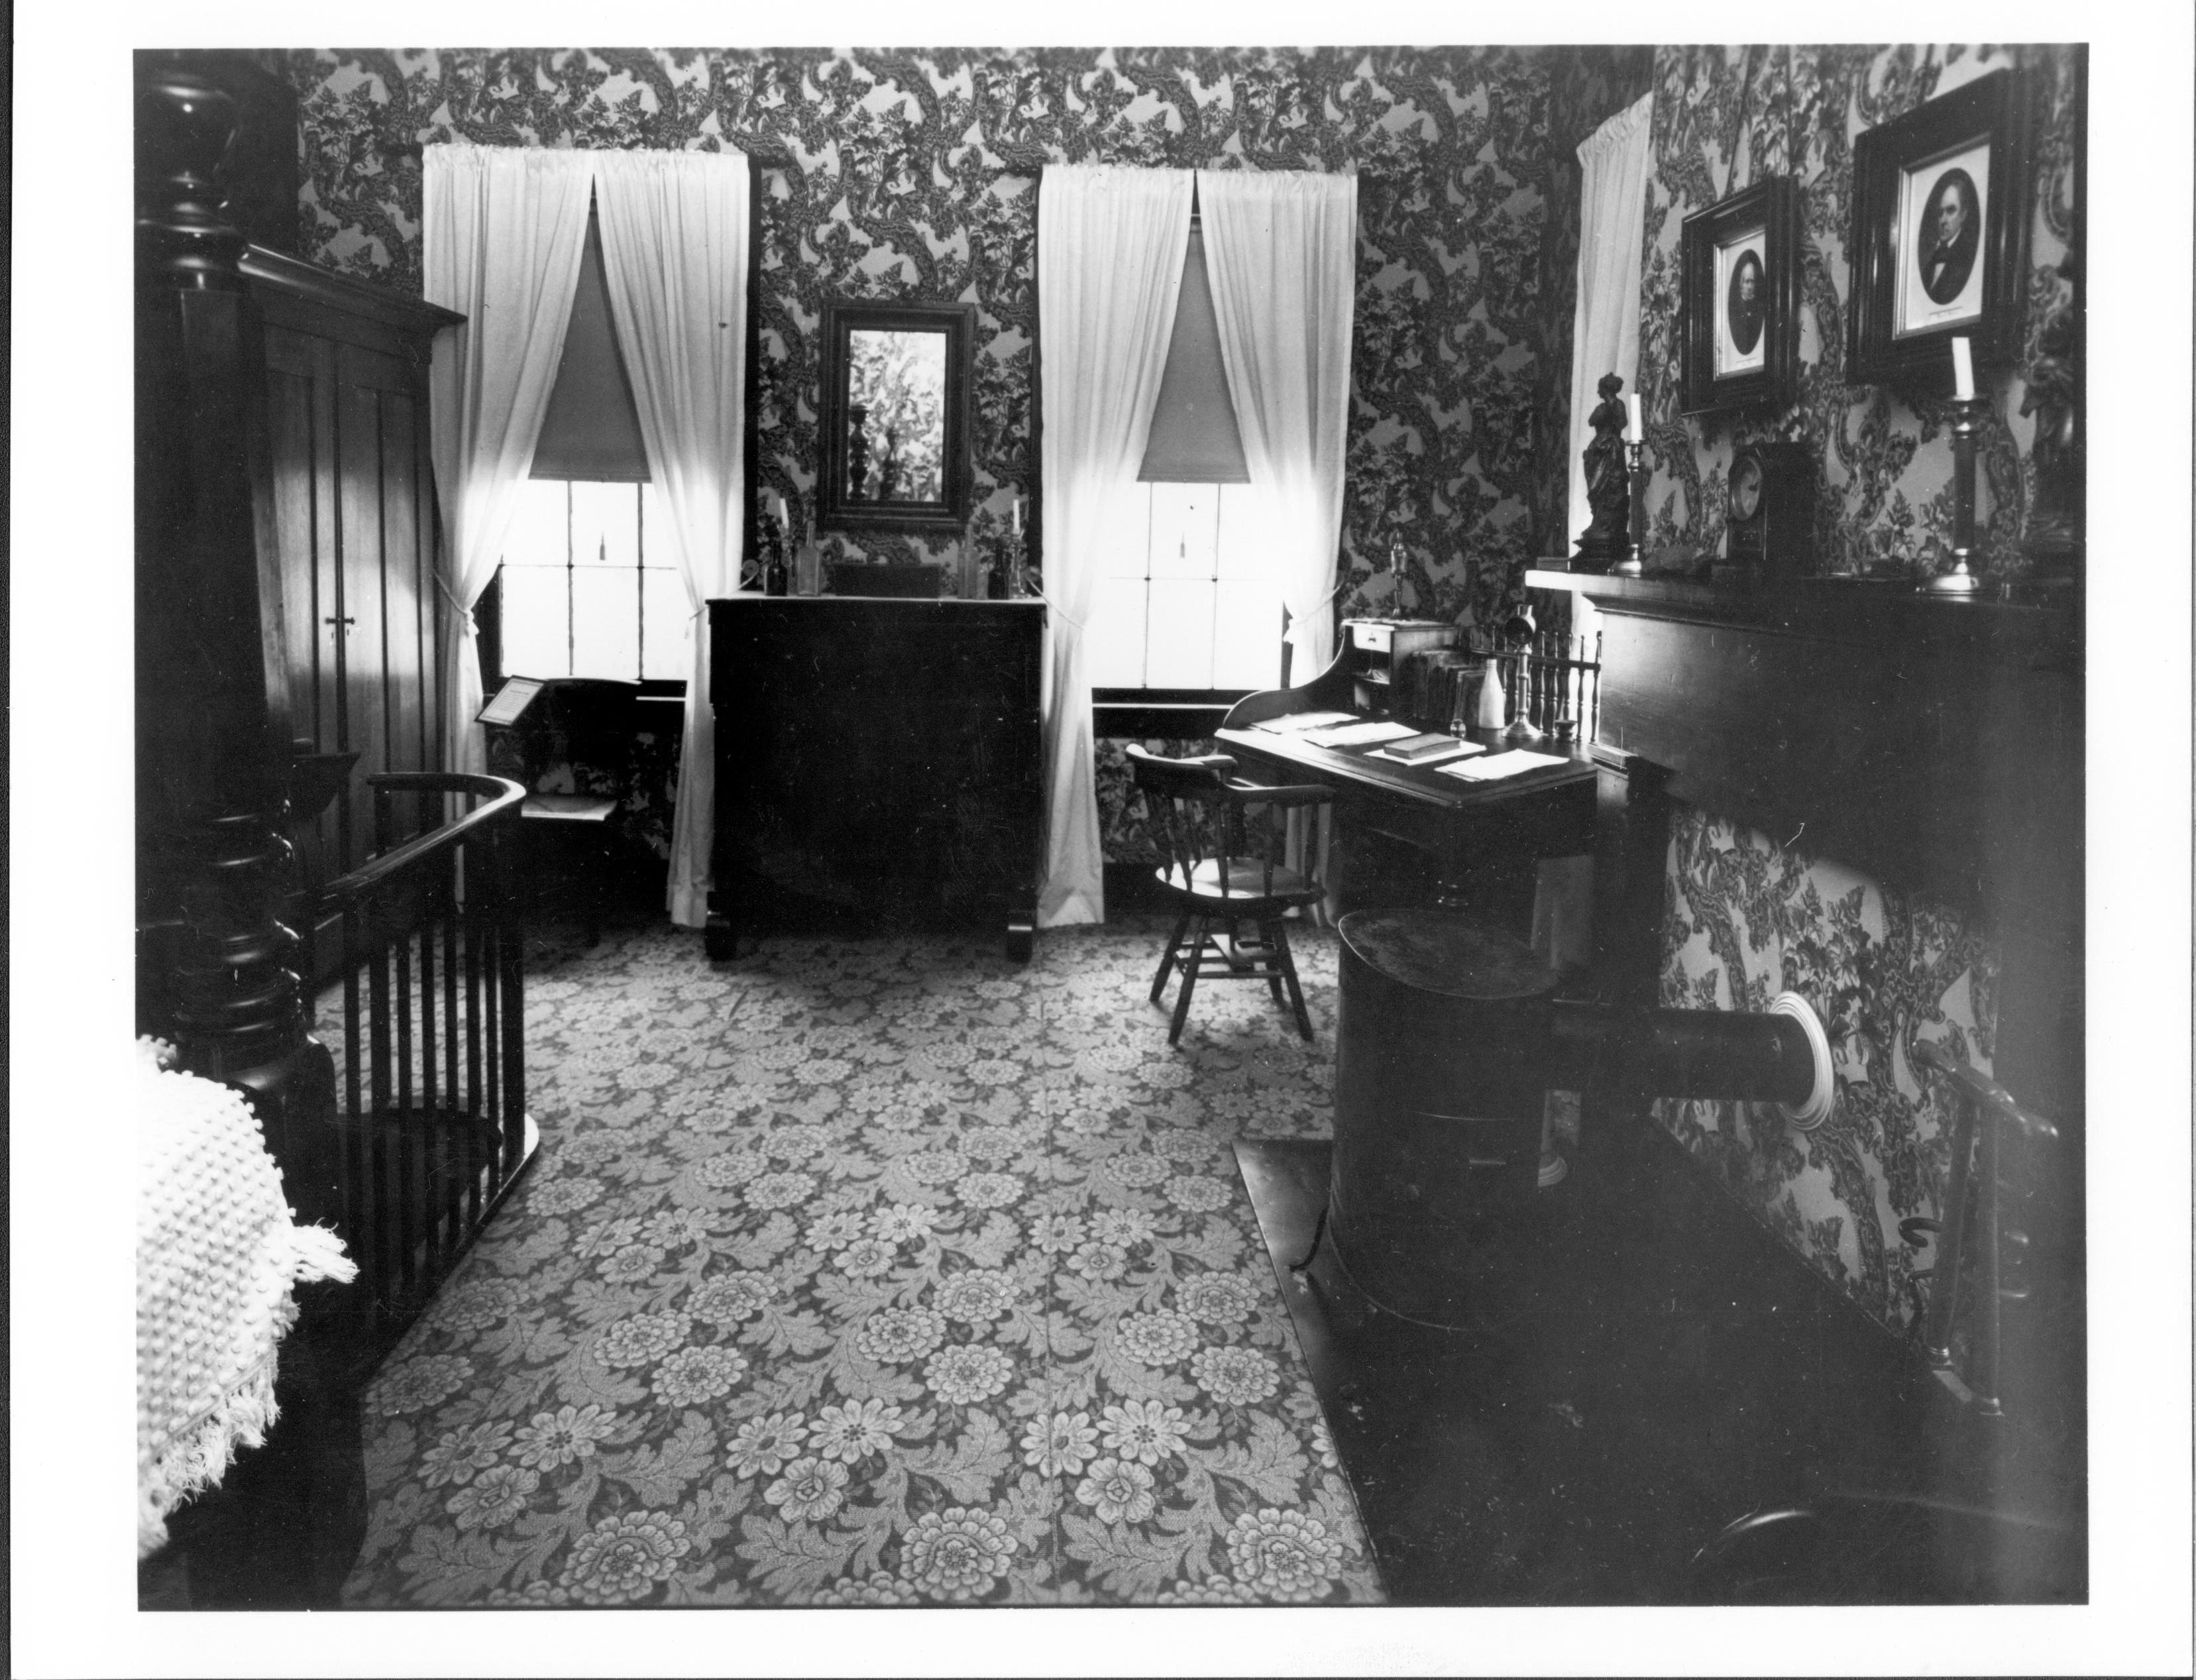 NA Lincoln Bedroom, picture 88 Lincoln Home, Bedroom, fireplace, windows, chest, bedpost